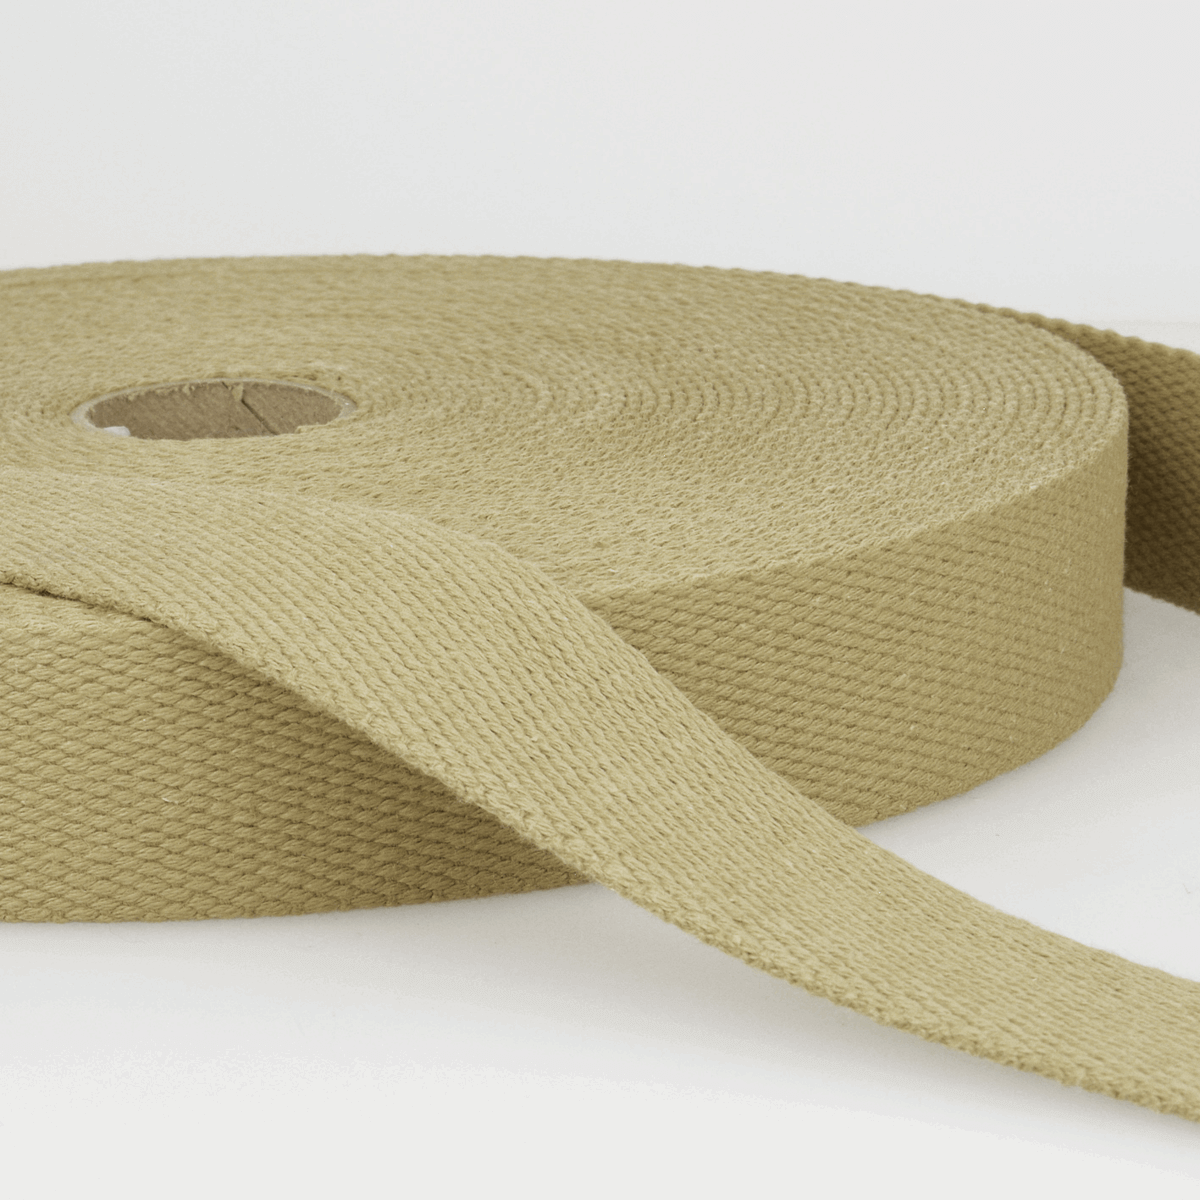 Solid Plain Cotton Webbing: 25 mm wide bag strapping. 20 colours. Per metre.